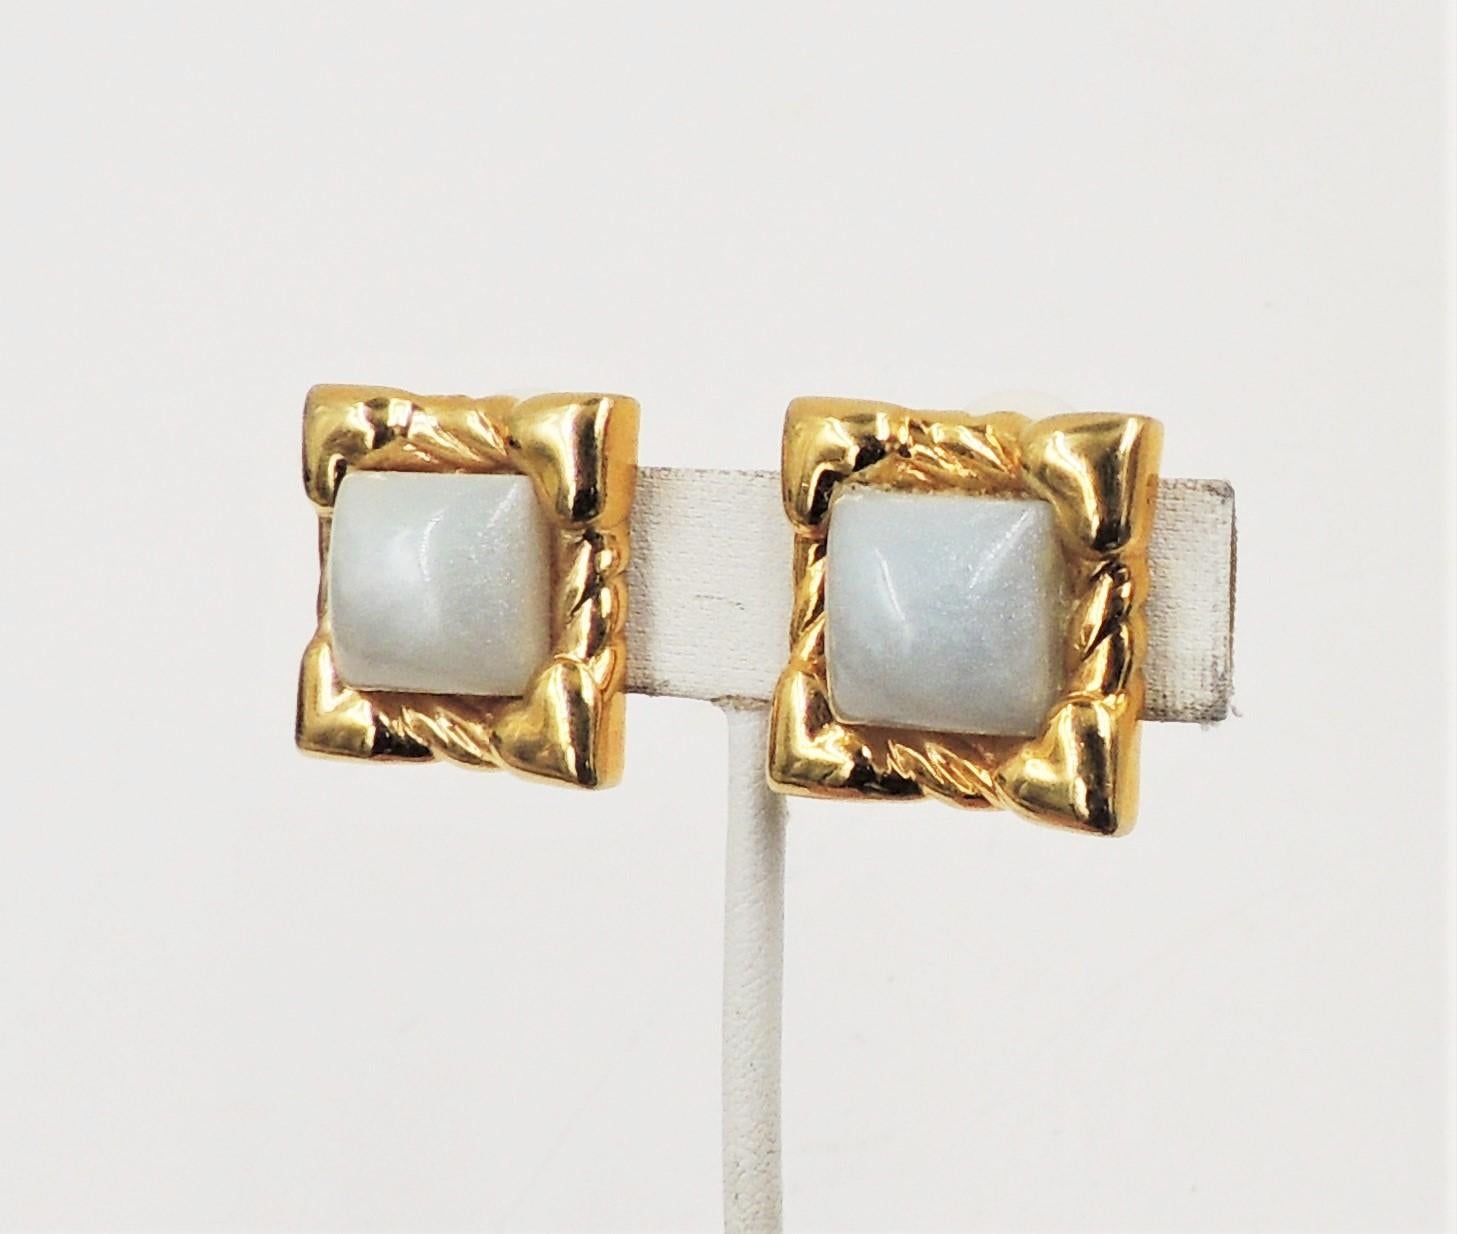 Vintage late 1980s or early 1990s square goldtone and white iridescent sugarloaf cabochon clip back earrings. Marked 